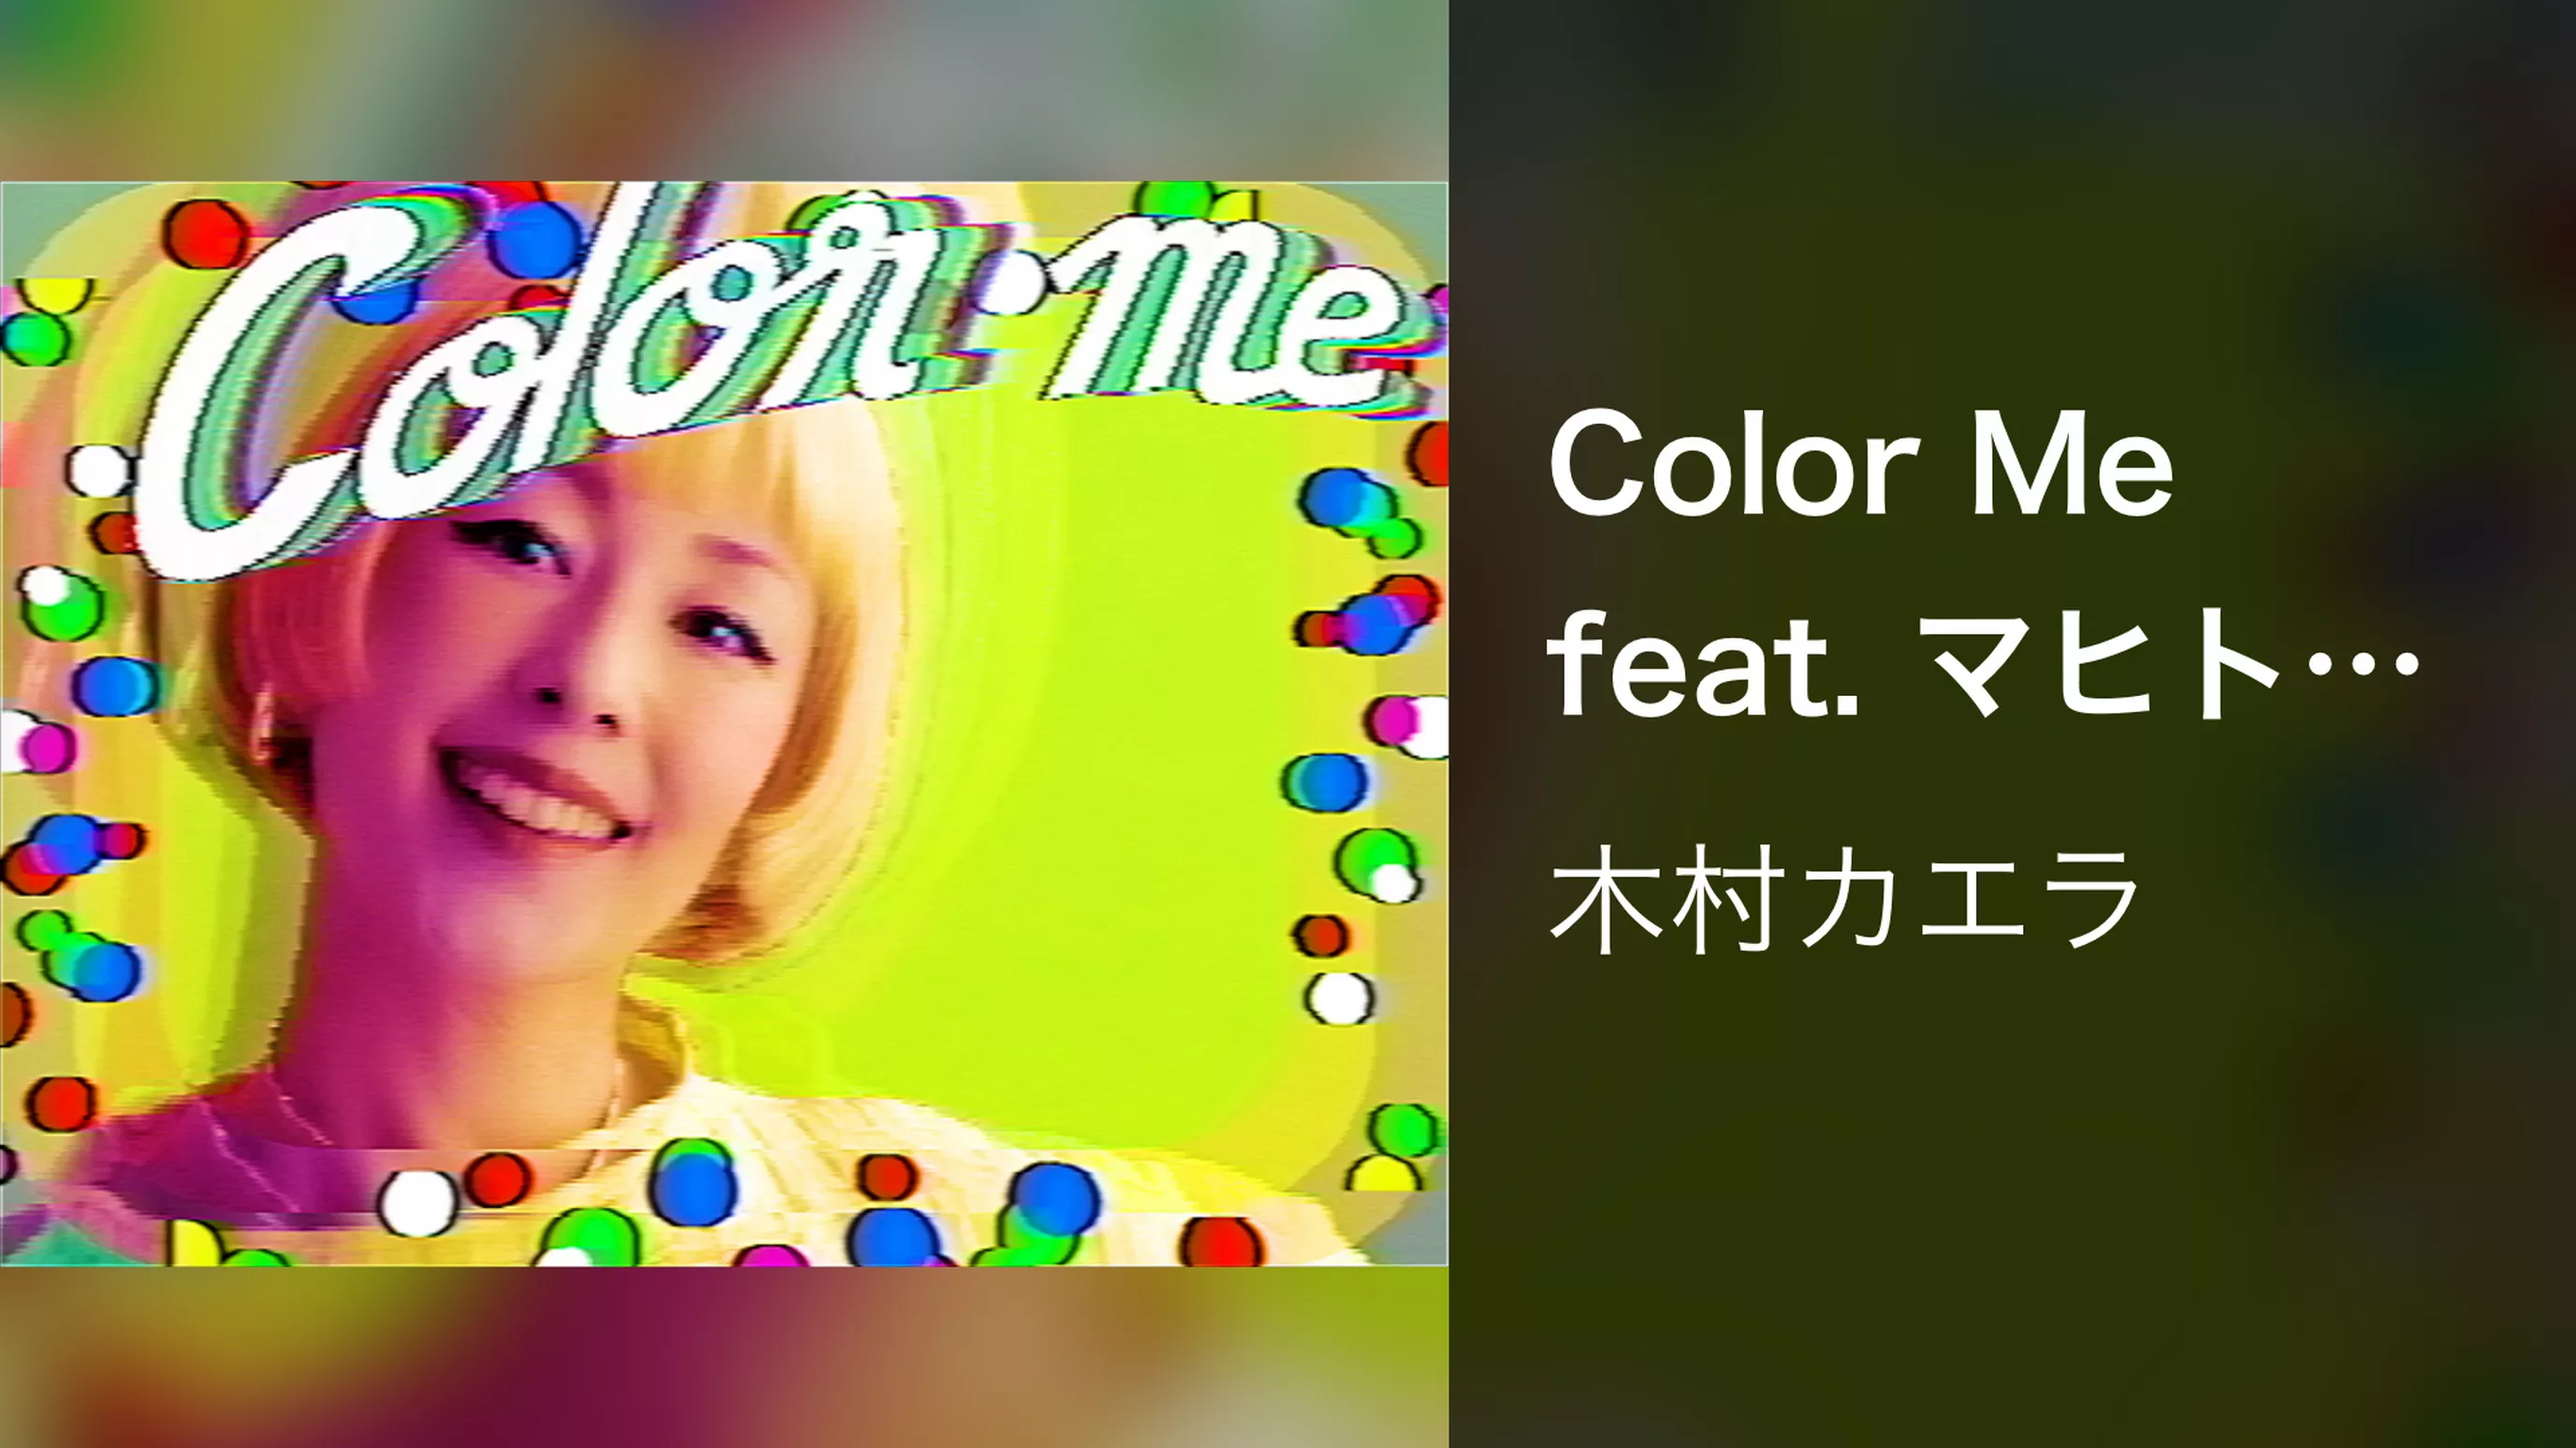 Color Me feat. マヒトゥ・ザ・ピーポー